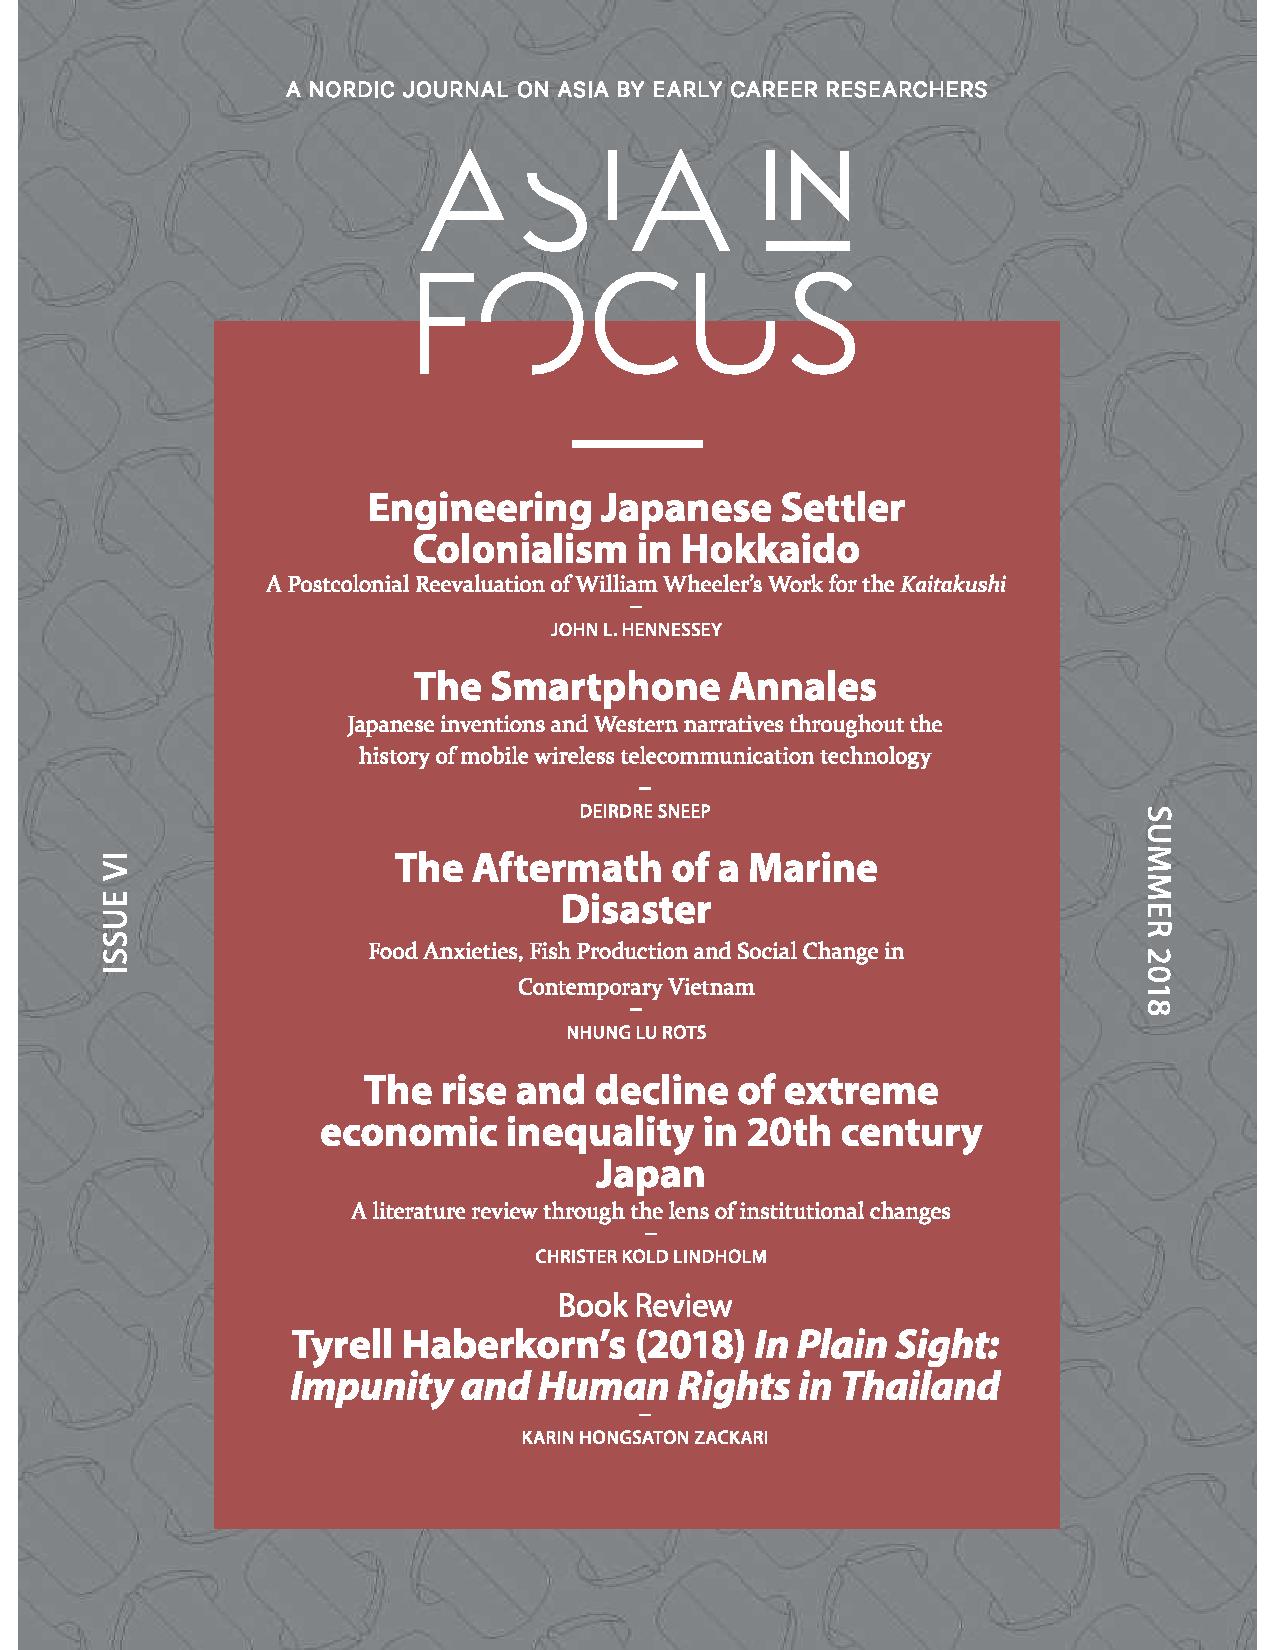 					View Vol. 6 (2018): Asia in Focus Issue 6
				